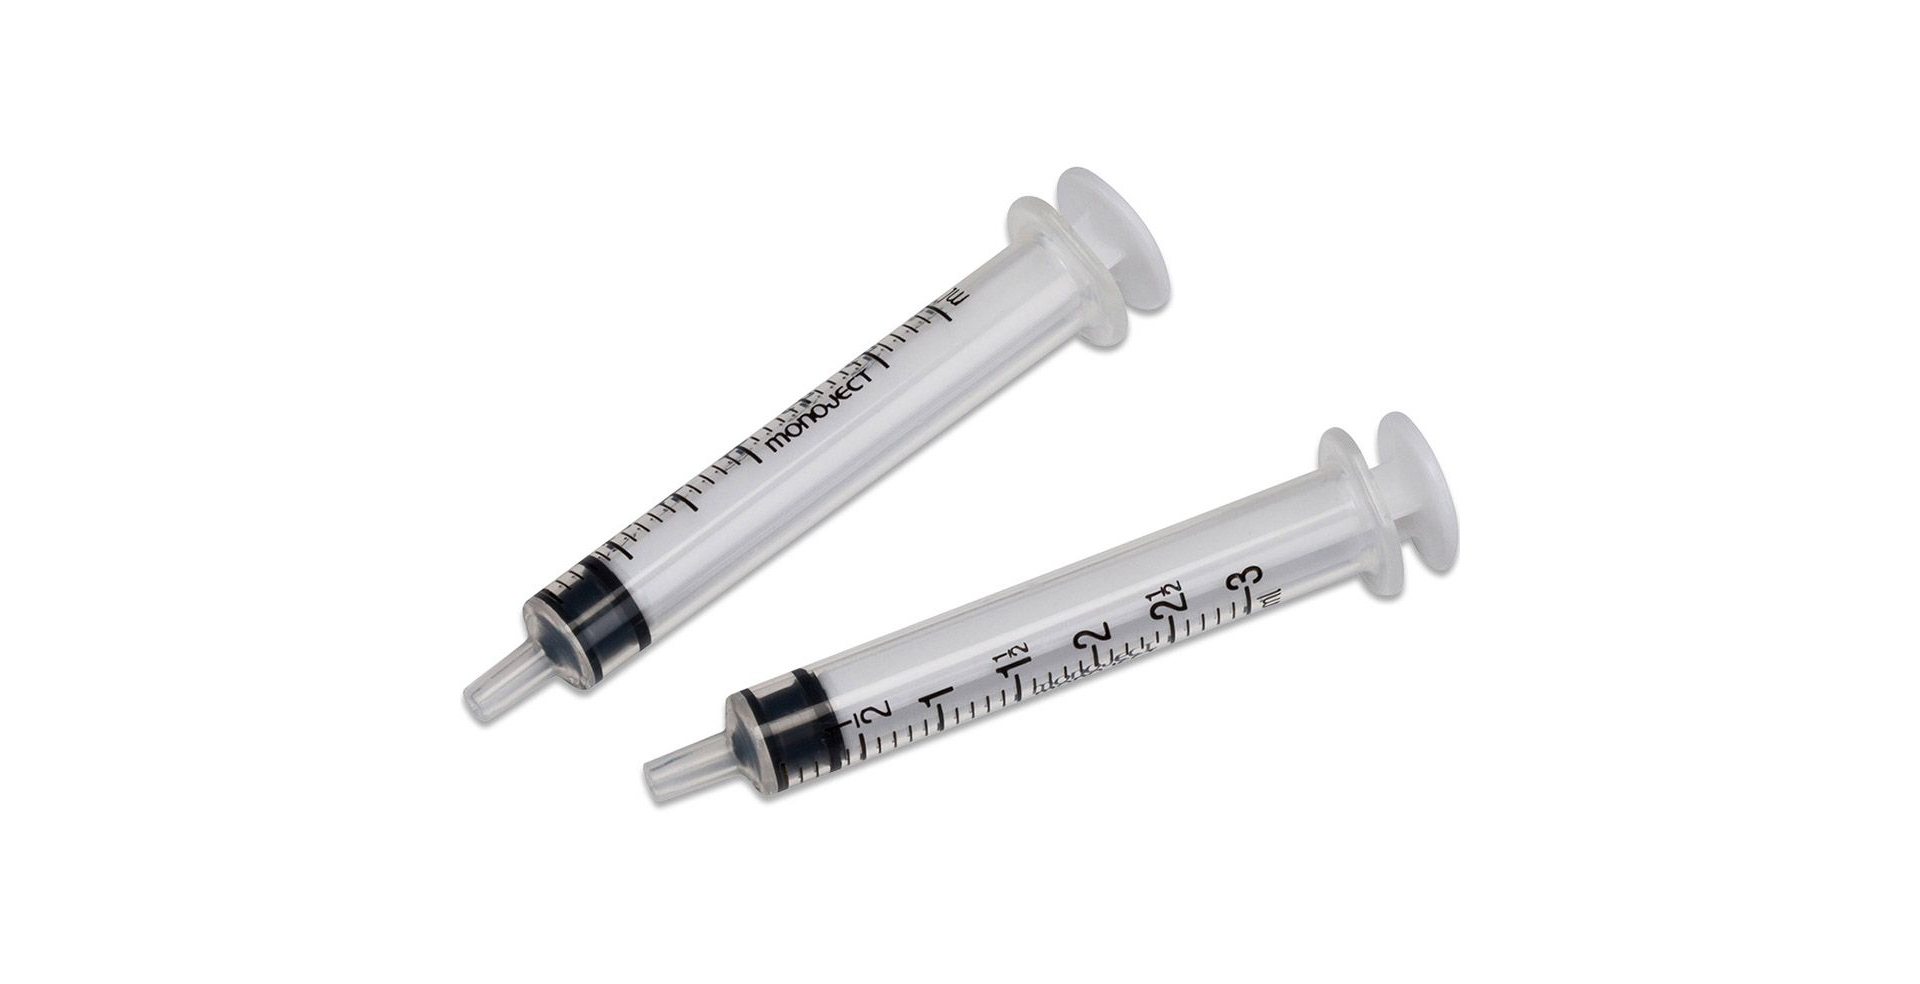 6cc Syringes w/o Needle Products, Supplies and Equipment